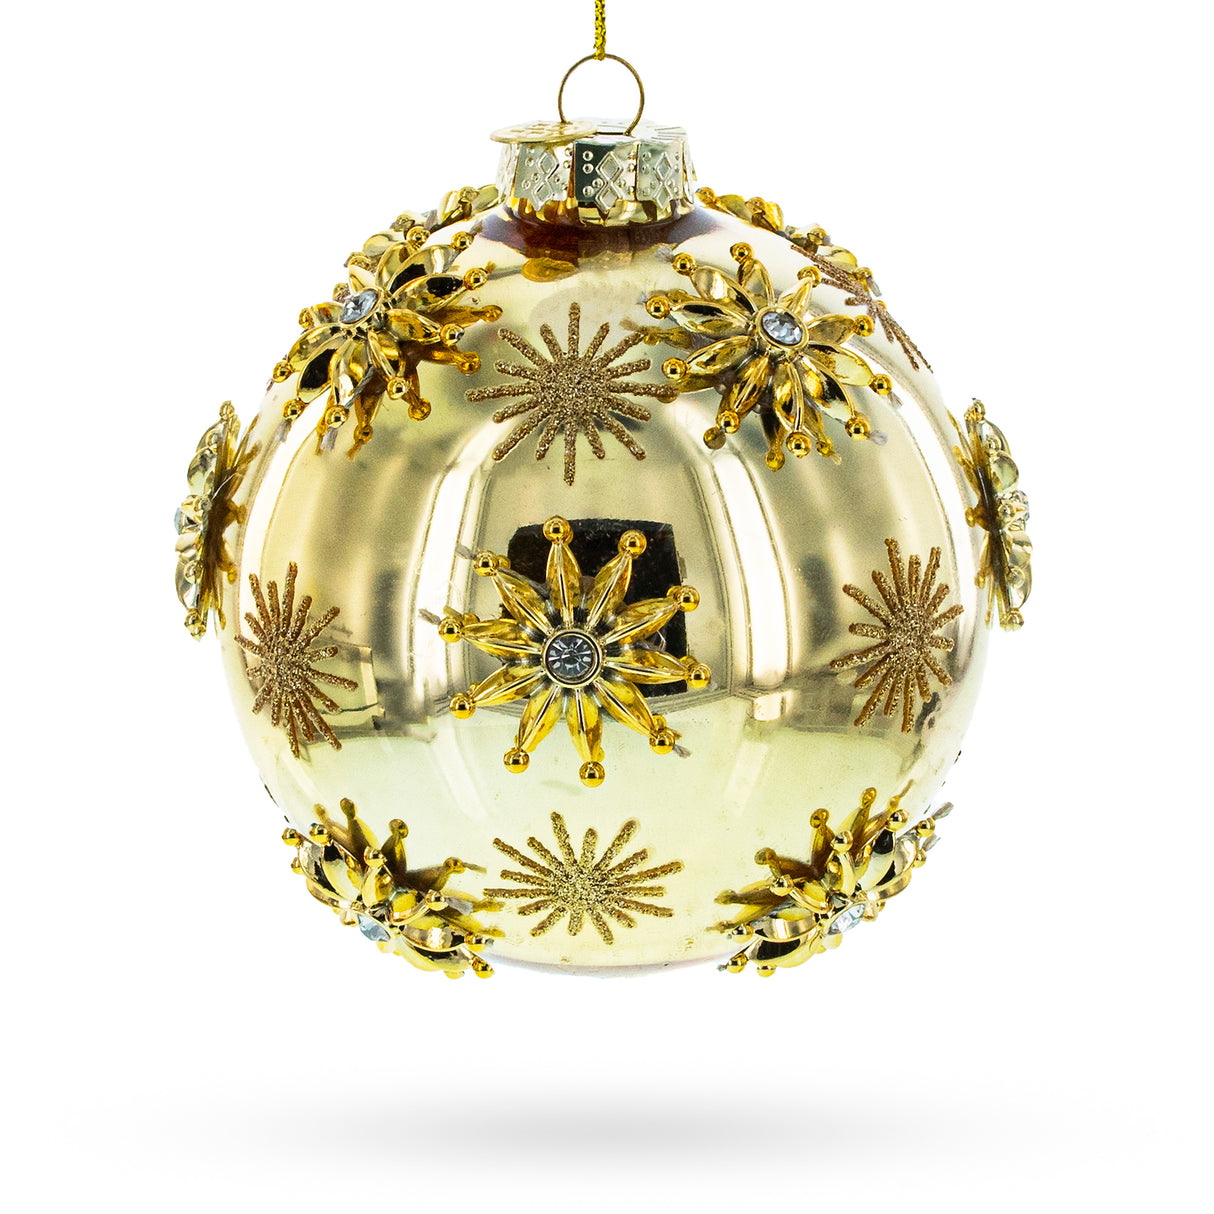 Elegant Jeweled Snowflakes Adorning a Golden Glossy - Blown Glass Ball Christmas Ornament in Gold color, Round shape